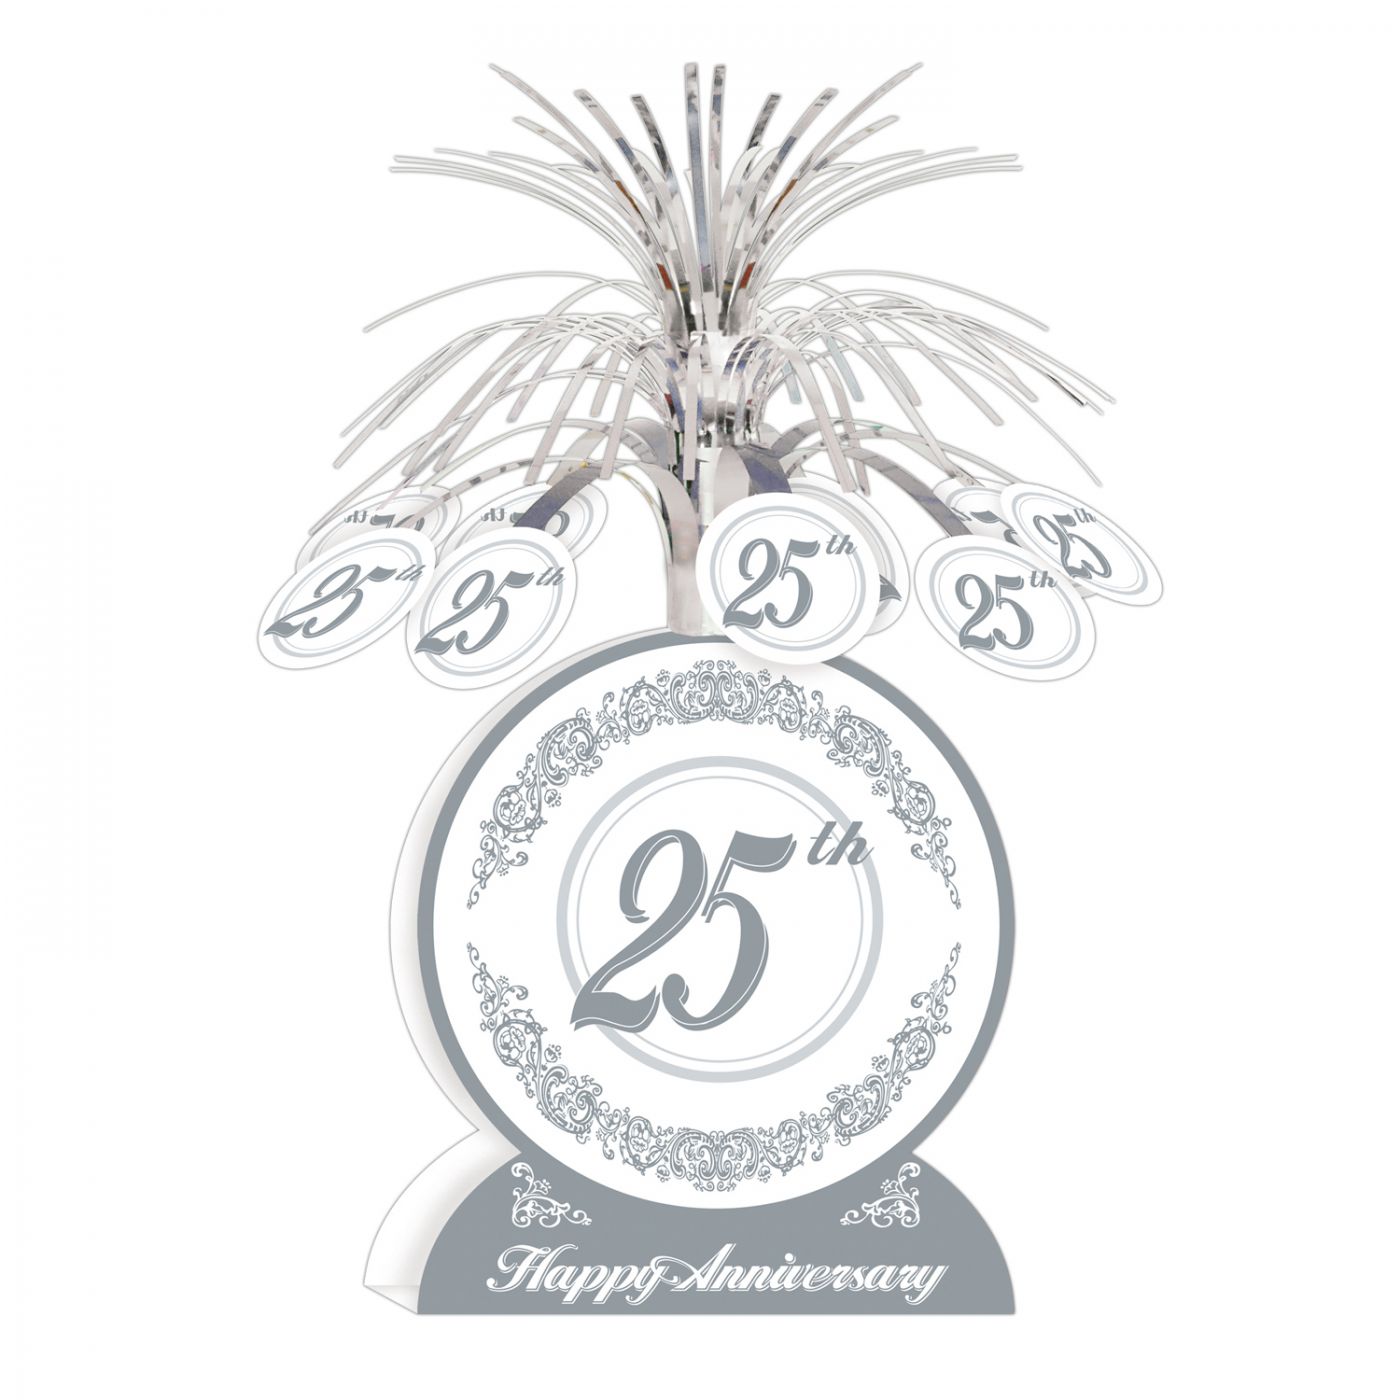 Image of 25th Anniversary Centerpiece